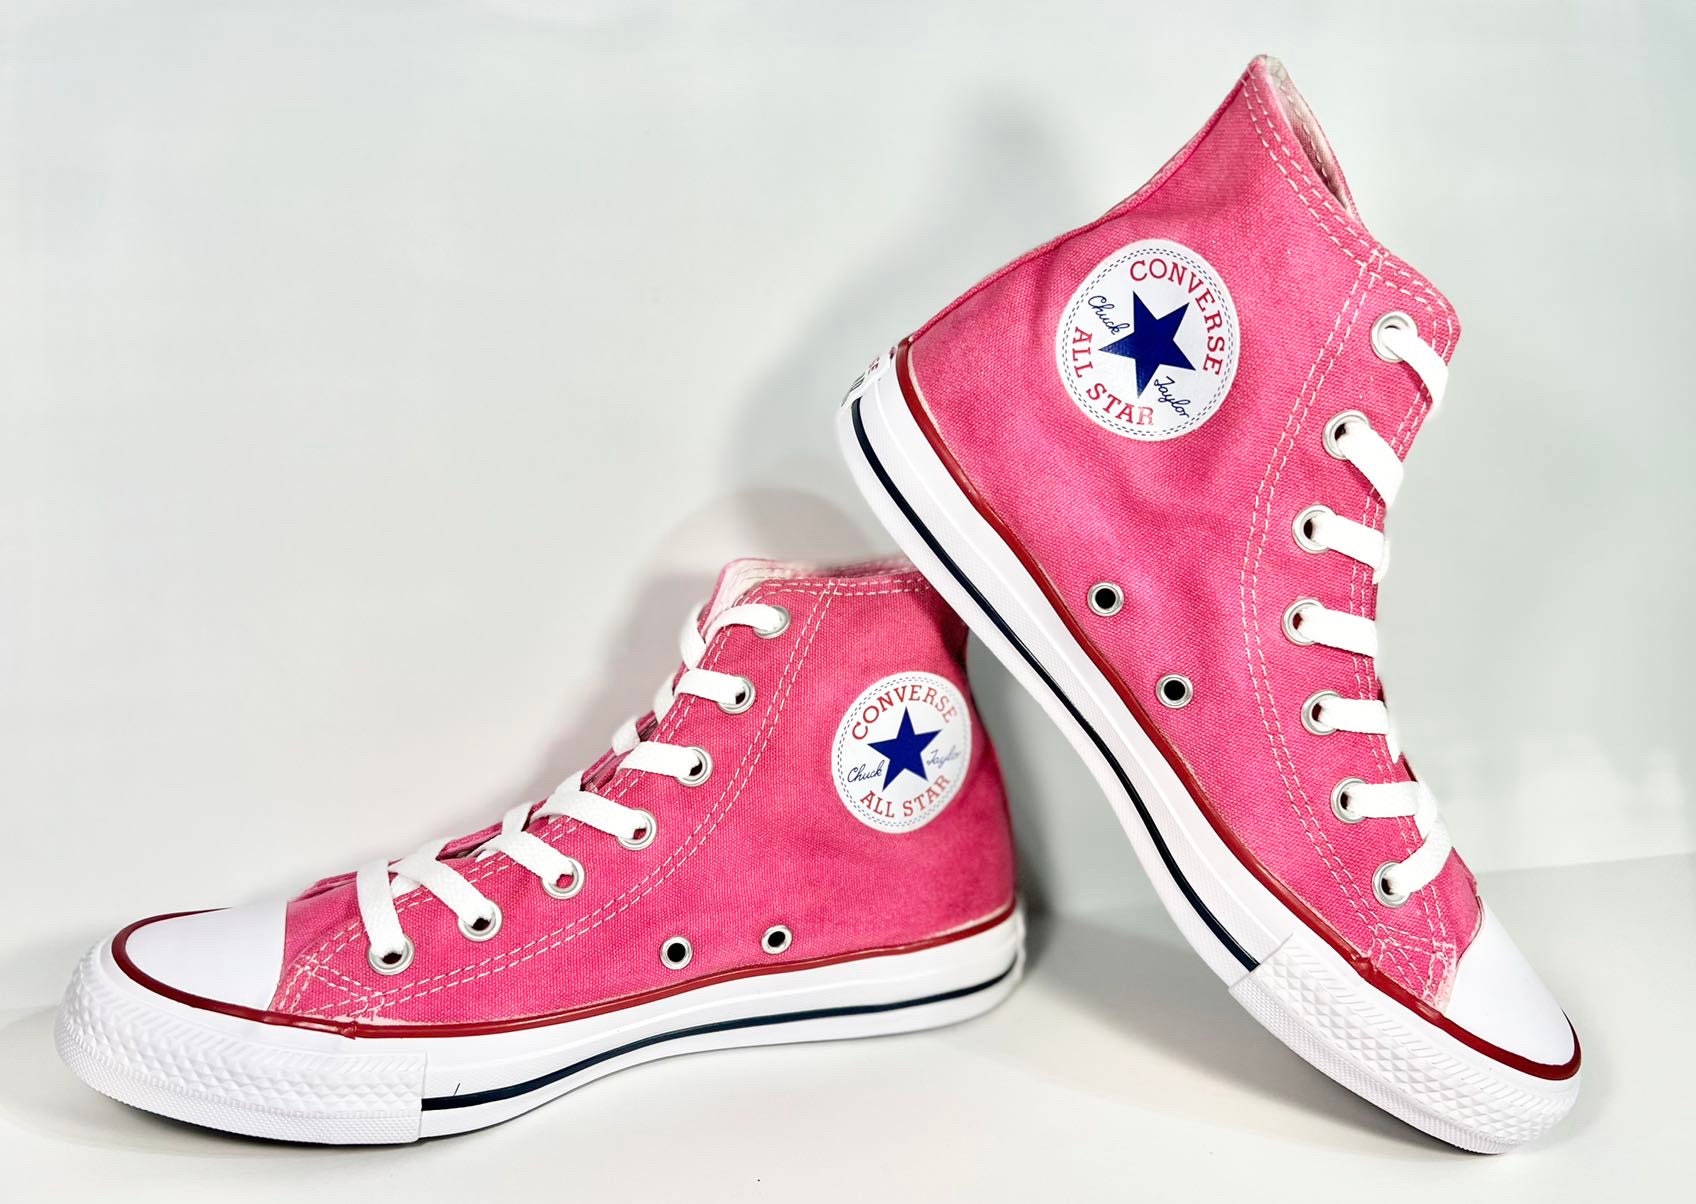 cada Psicológico Rebaño Custom Dyed Hot Pink Converse All Star High Tops Shoes - Etsy